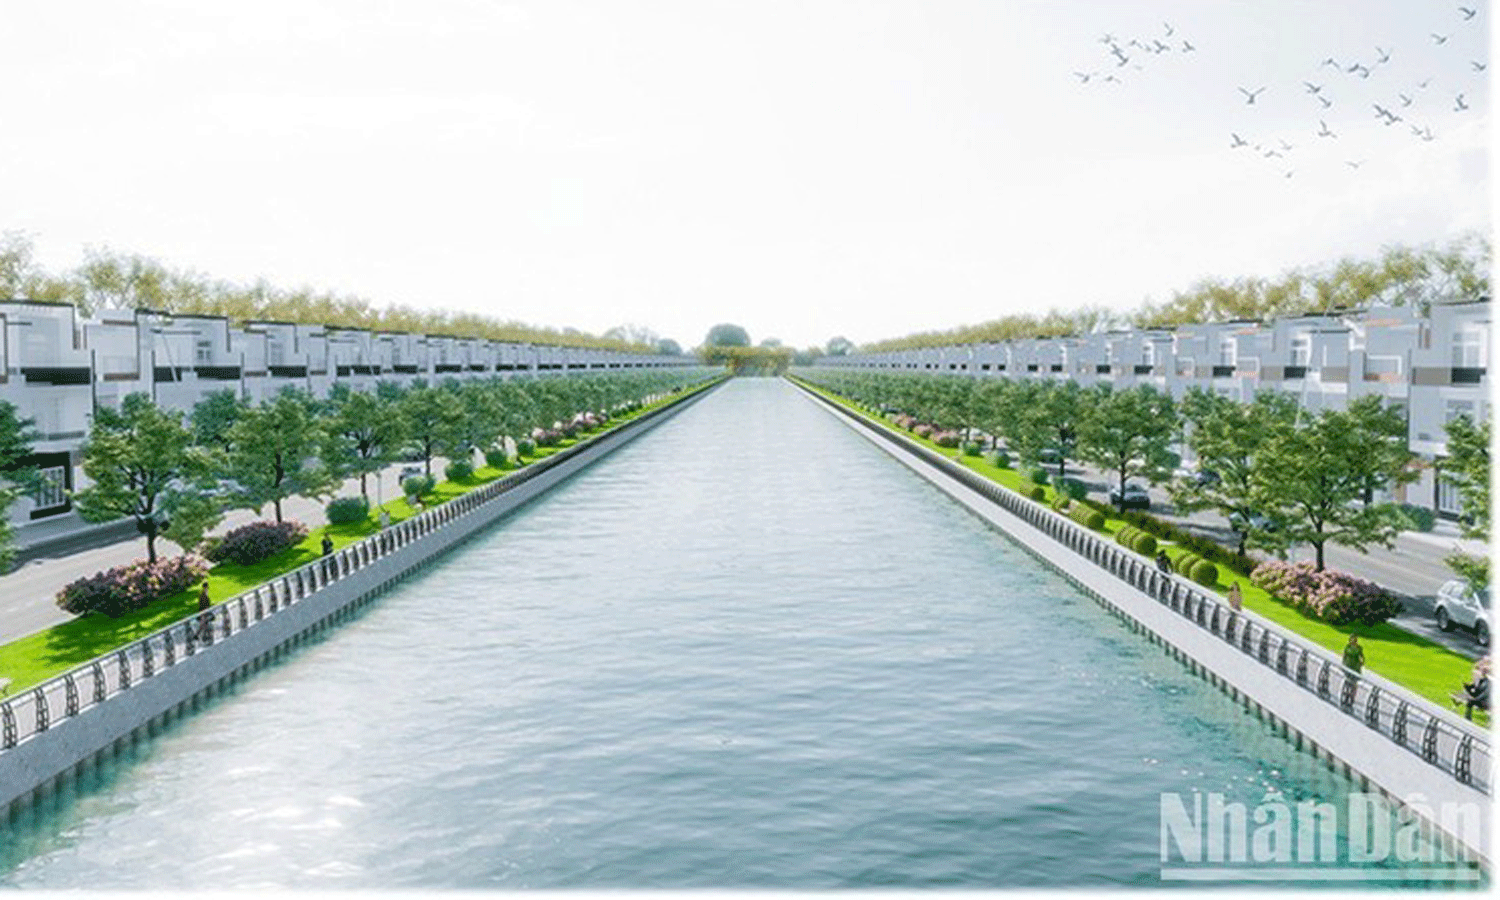 The rendering of the canal after renovation.